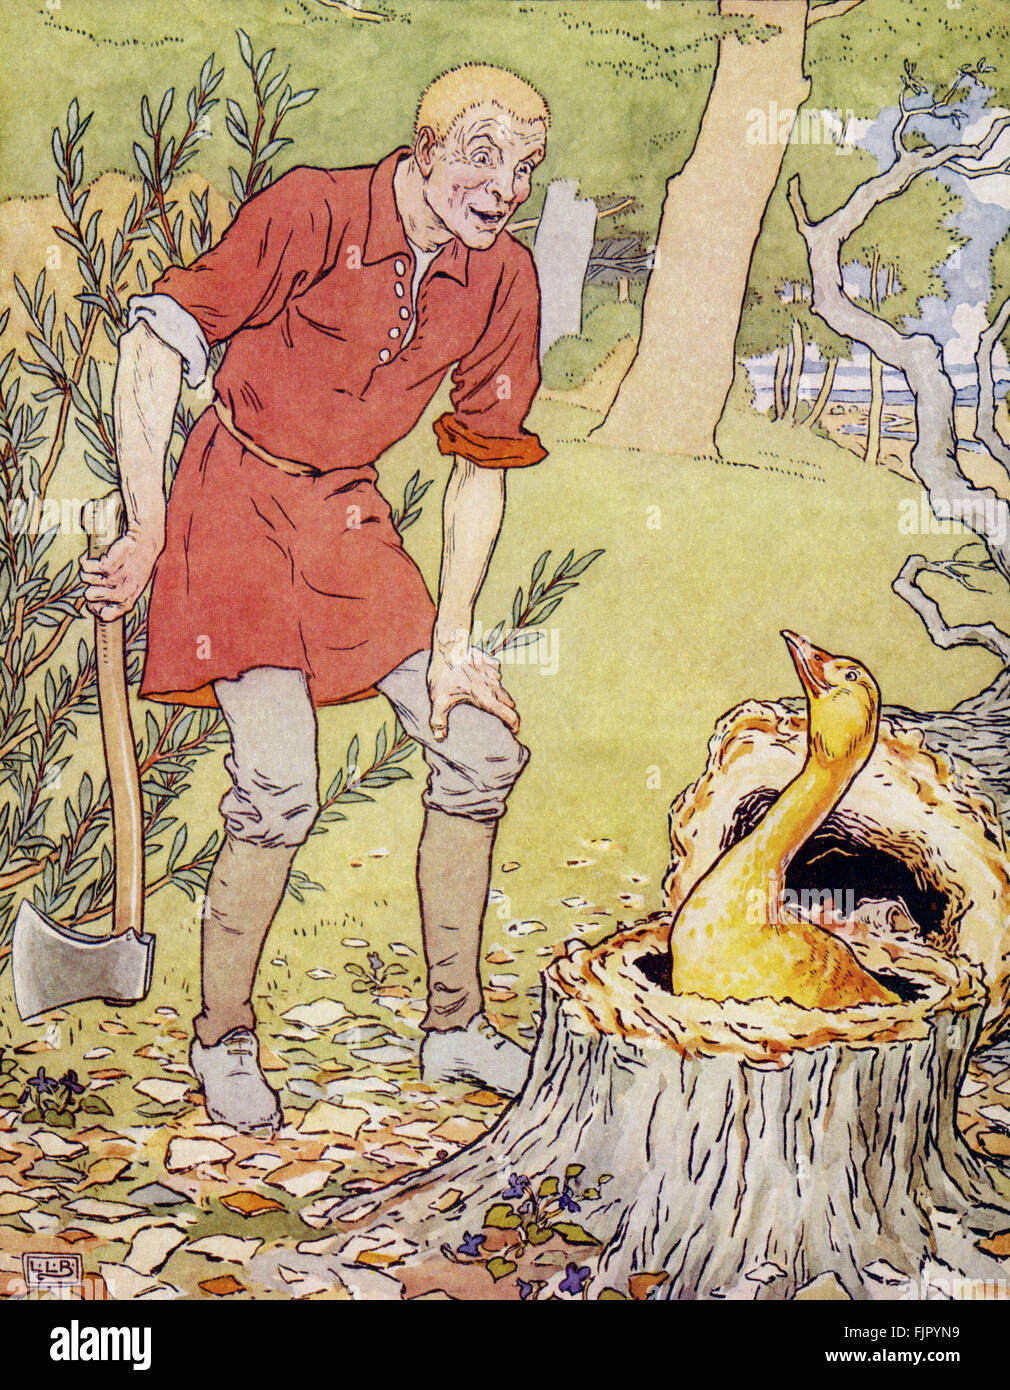 The Golden Goose - the Simpleton discovers the golden goose in the base of the tree, 1905 illustration by Leonard Leslie Brooke (1862 - 1940) Stock Photo